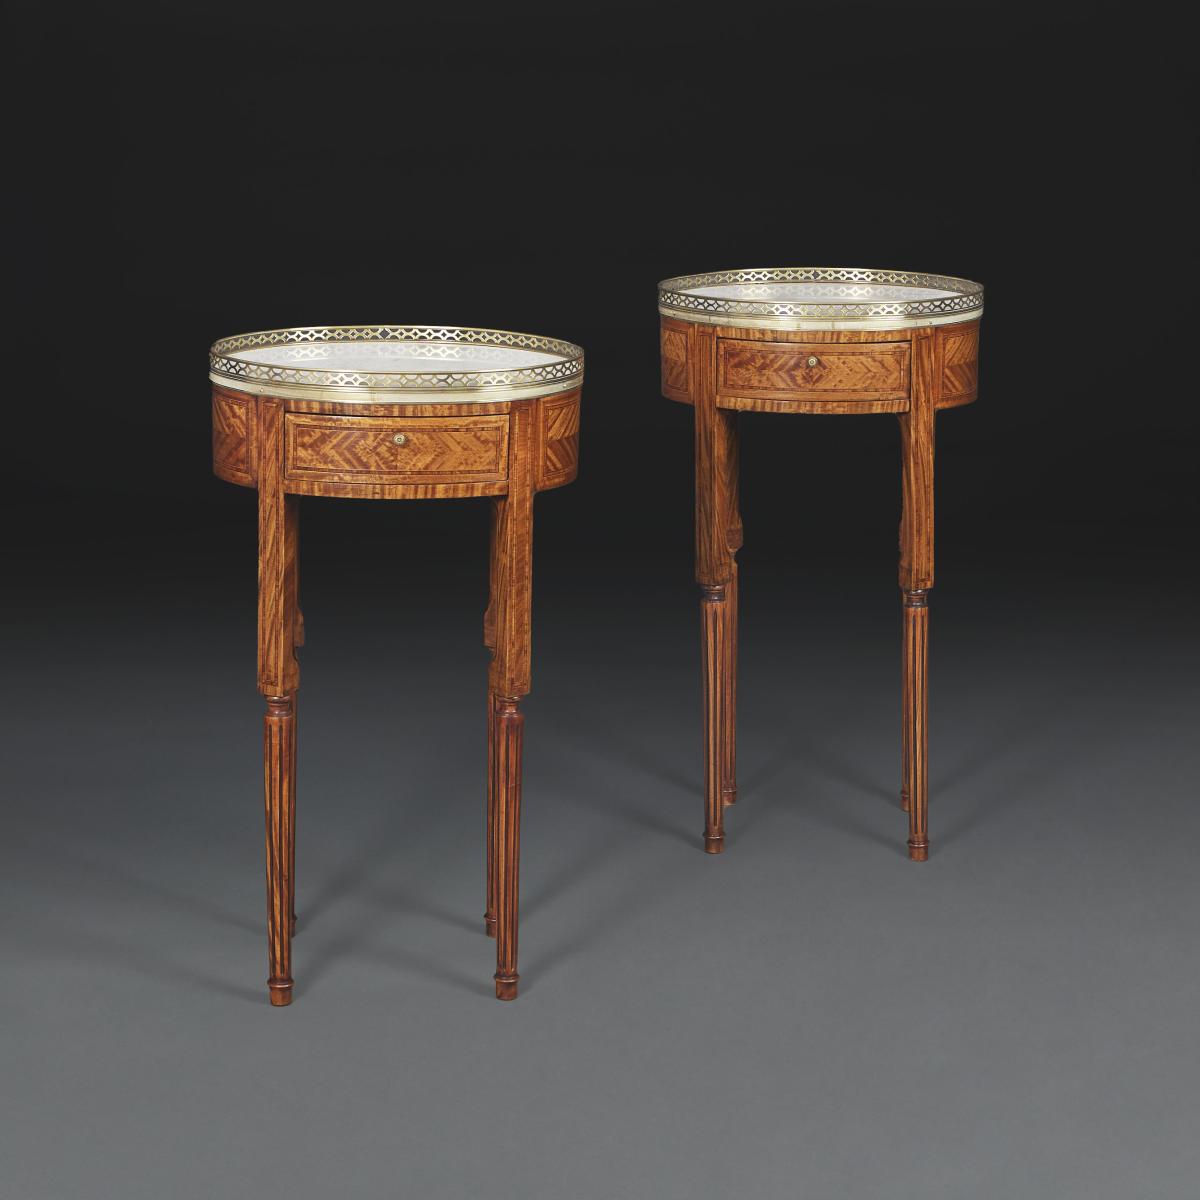 A Pair of Harewood and Rosewood Parquetry Occasional Tables